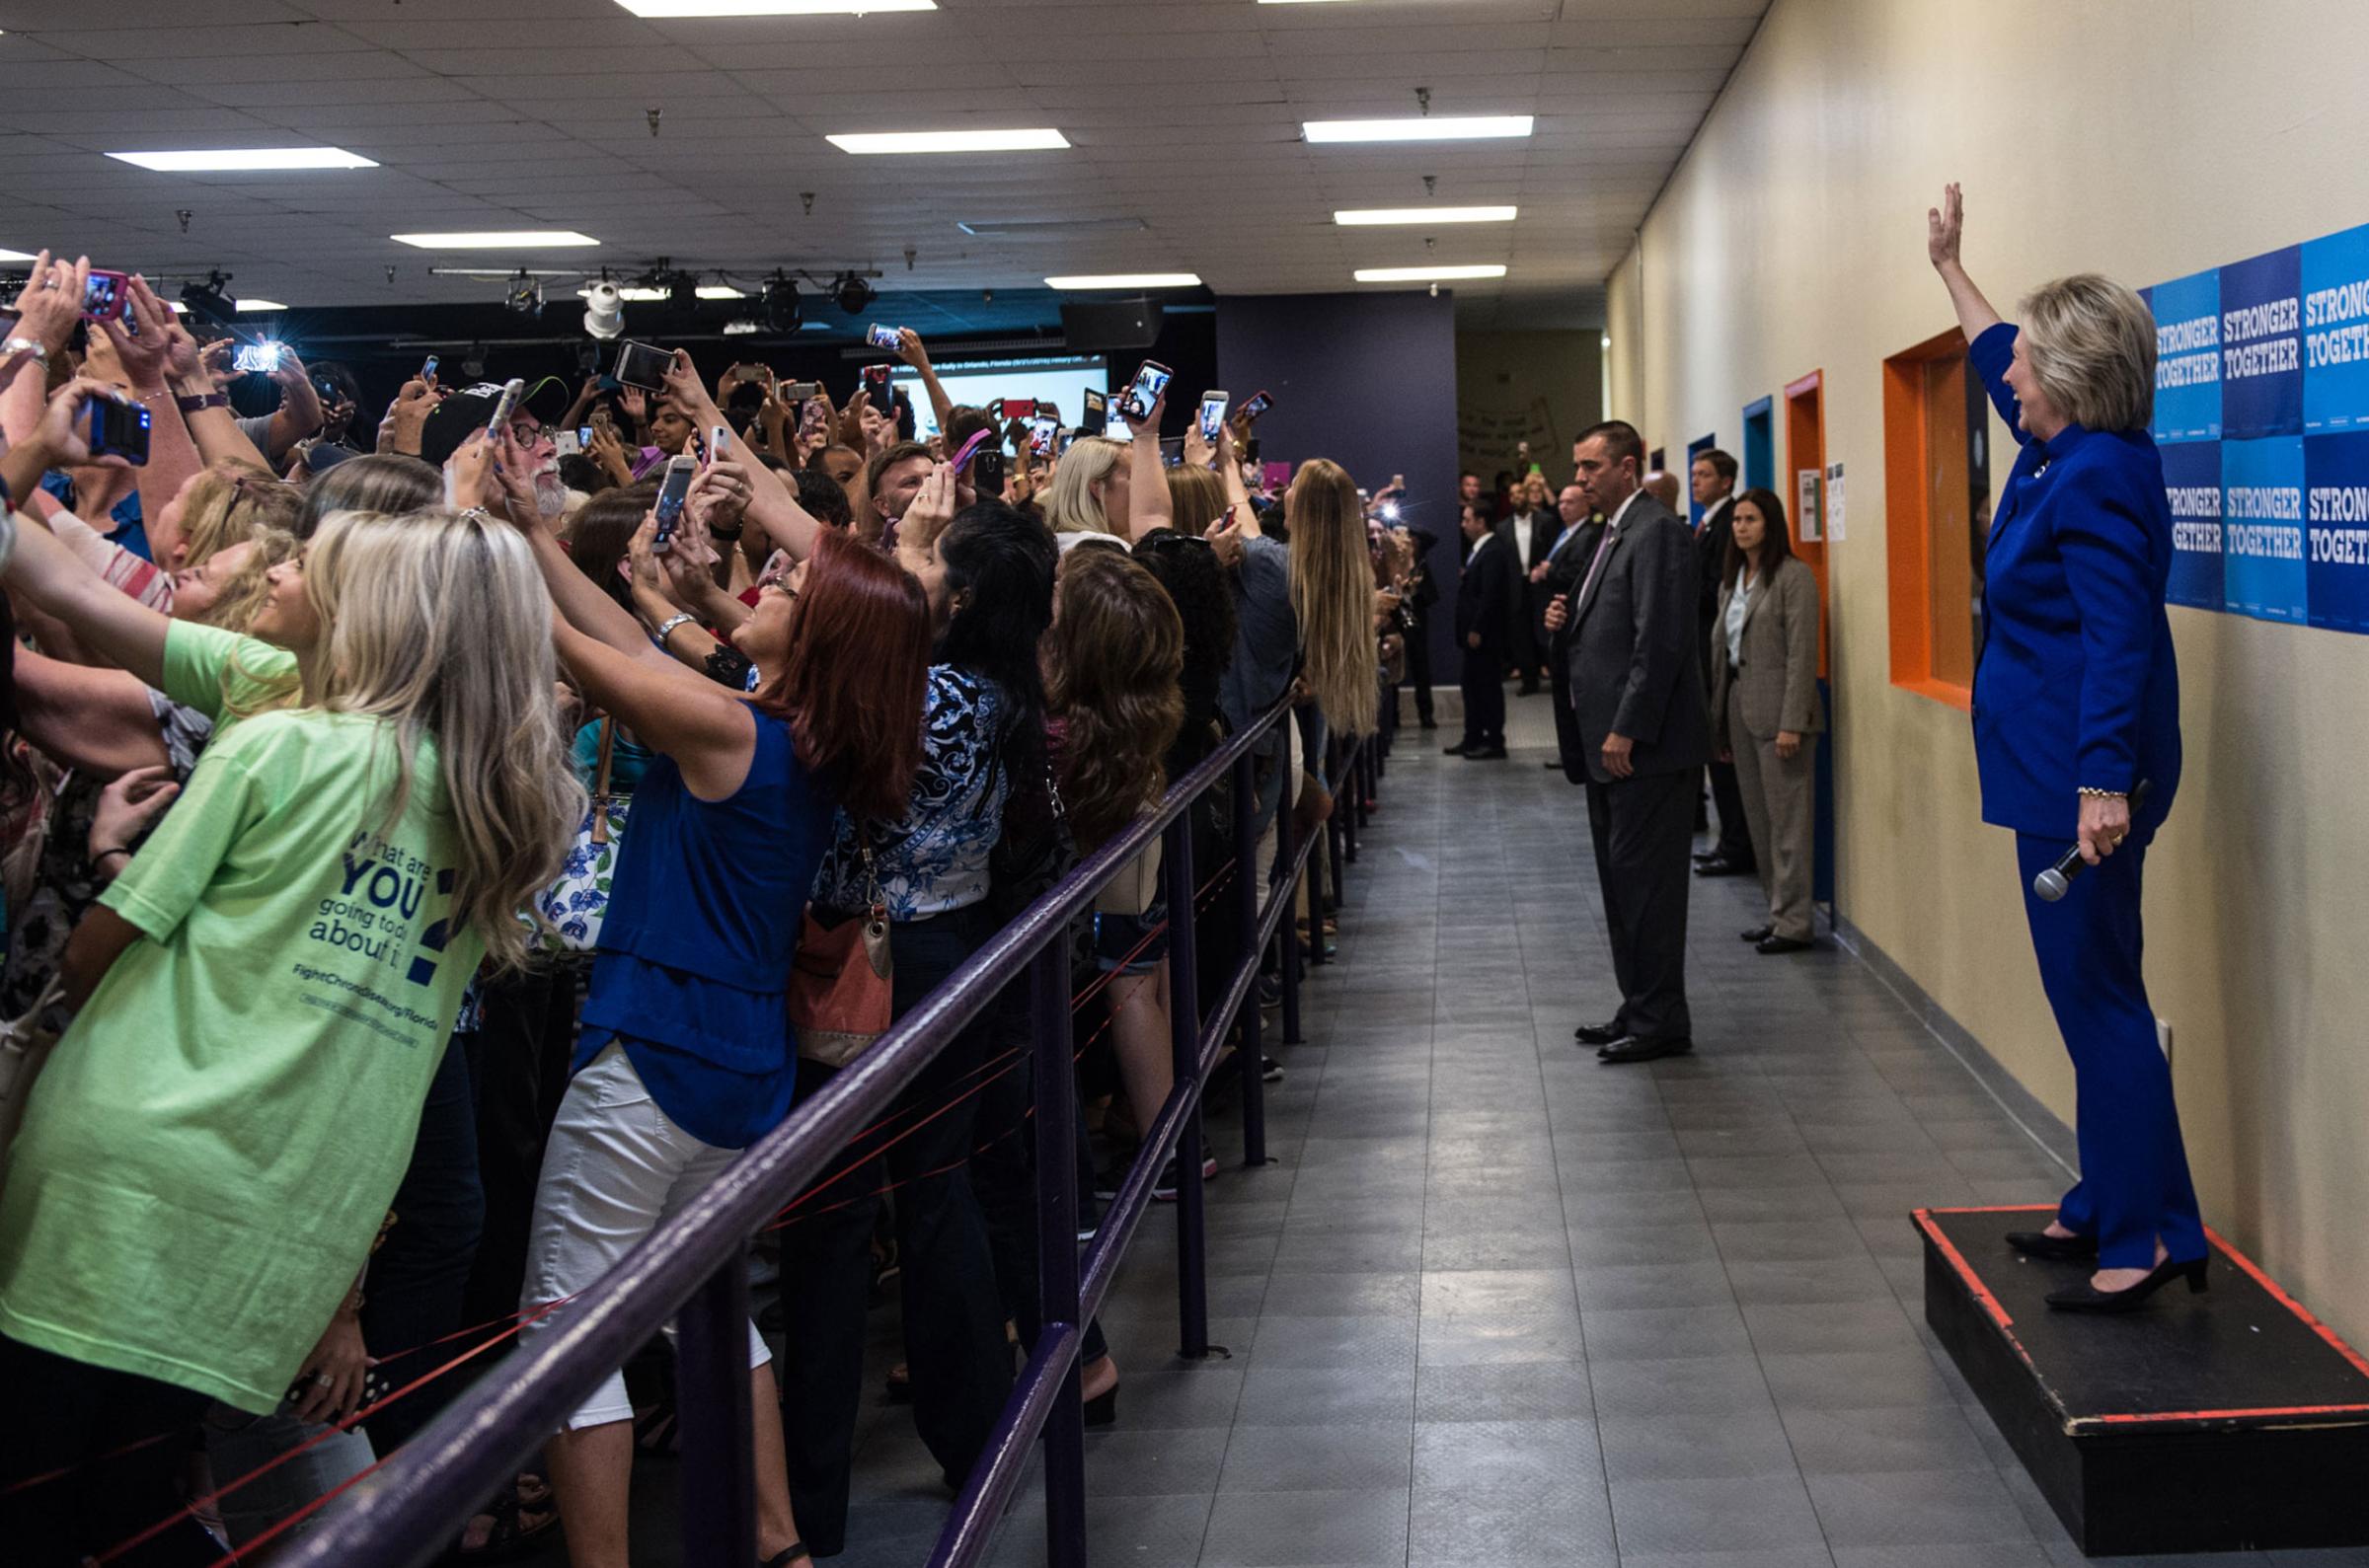 Hillary Clinton poses for selfies at an Orlando, Fla., event on Sept, 21, 2016.